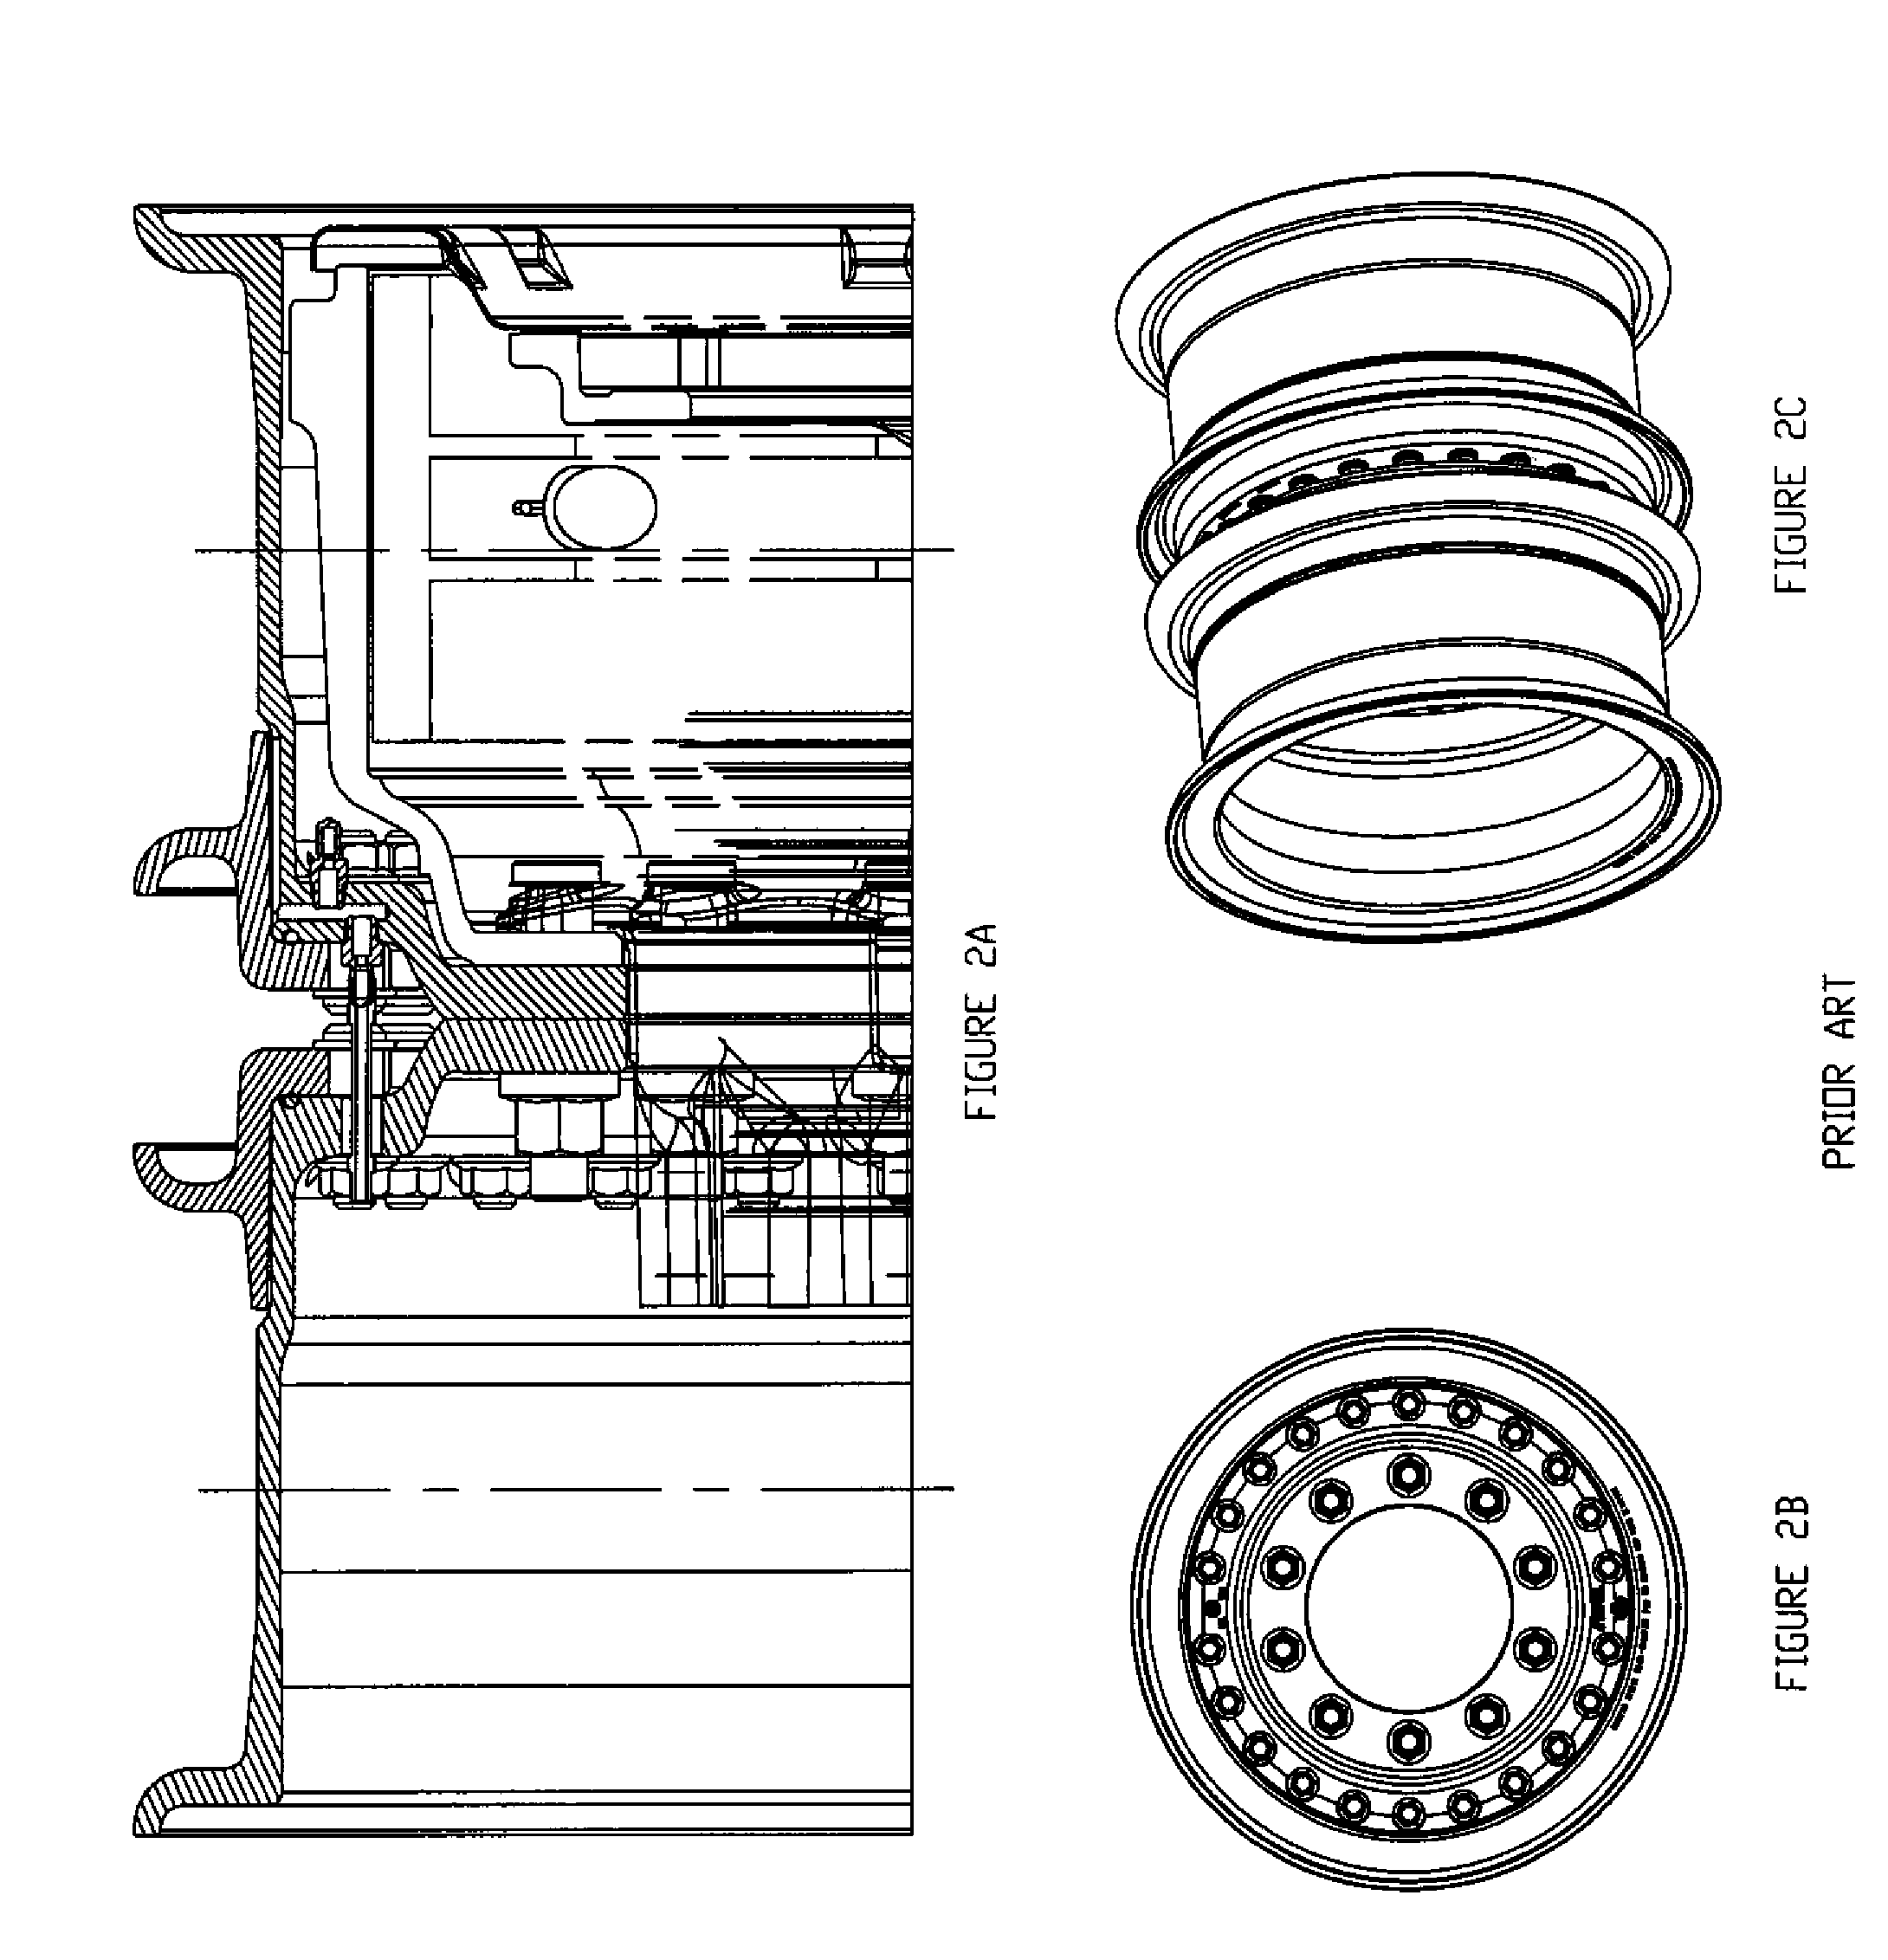 Dual wheels with common hub adapter